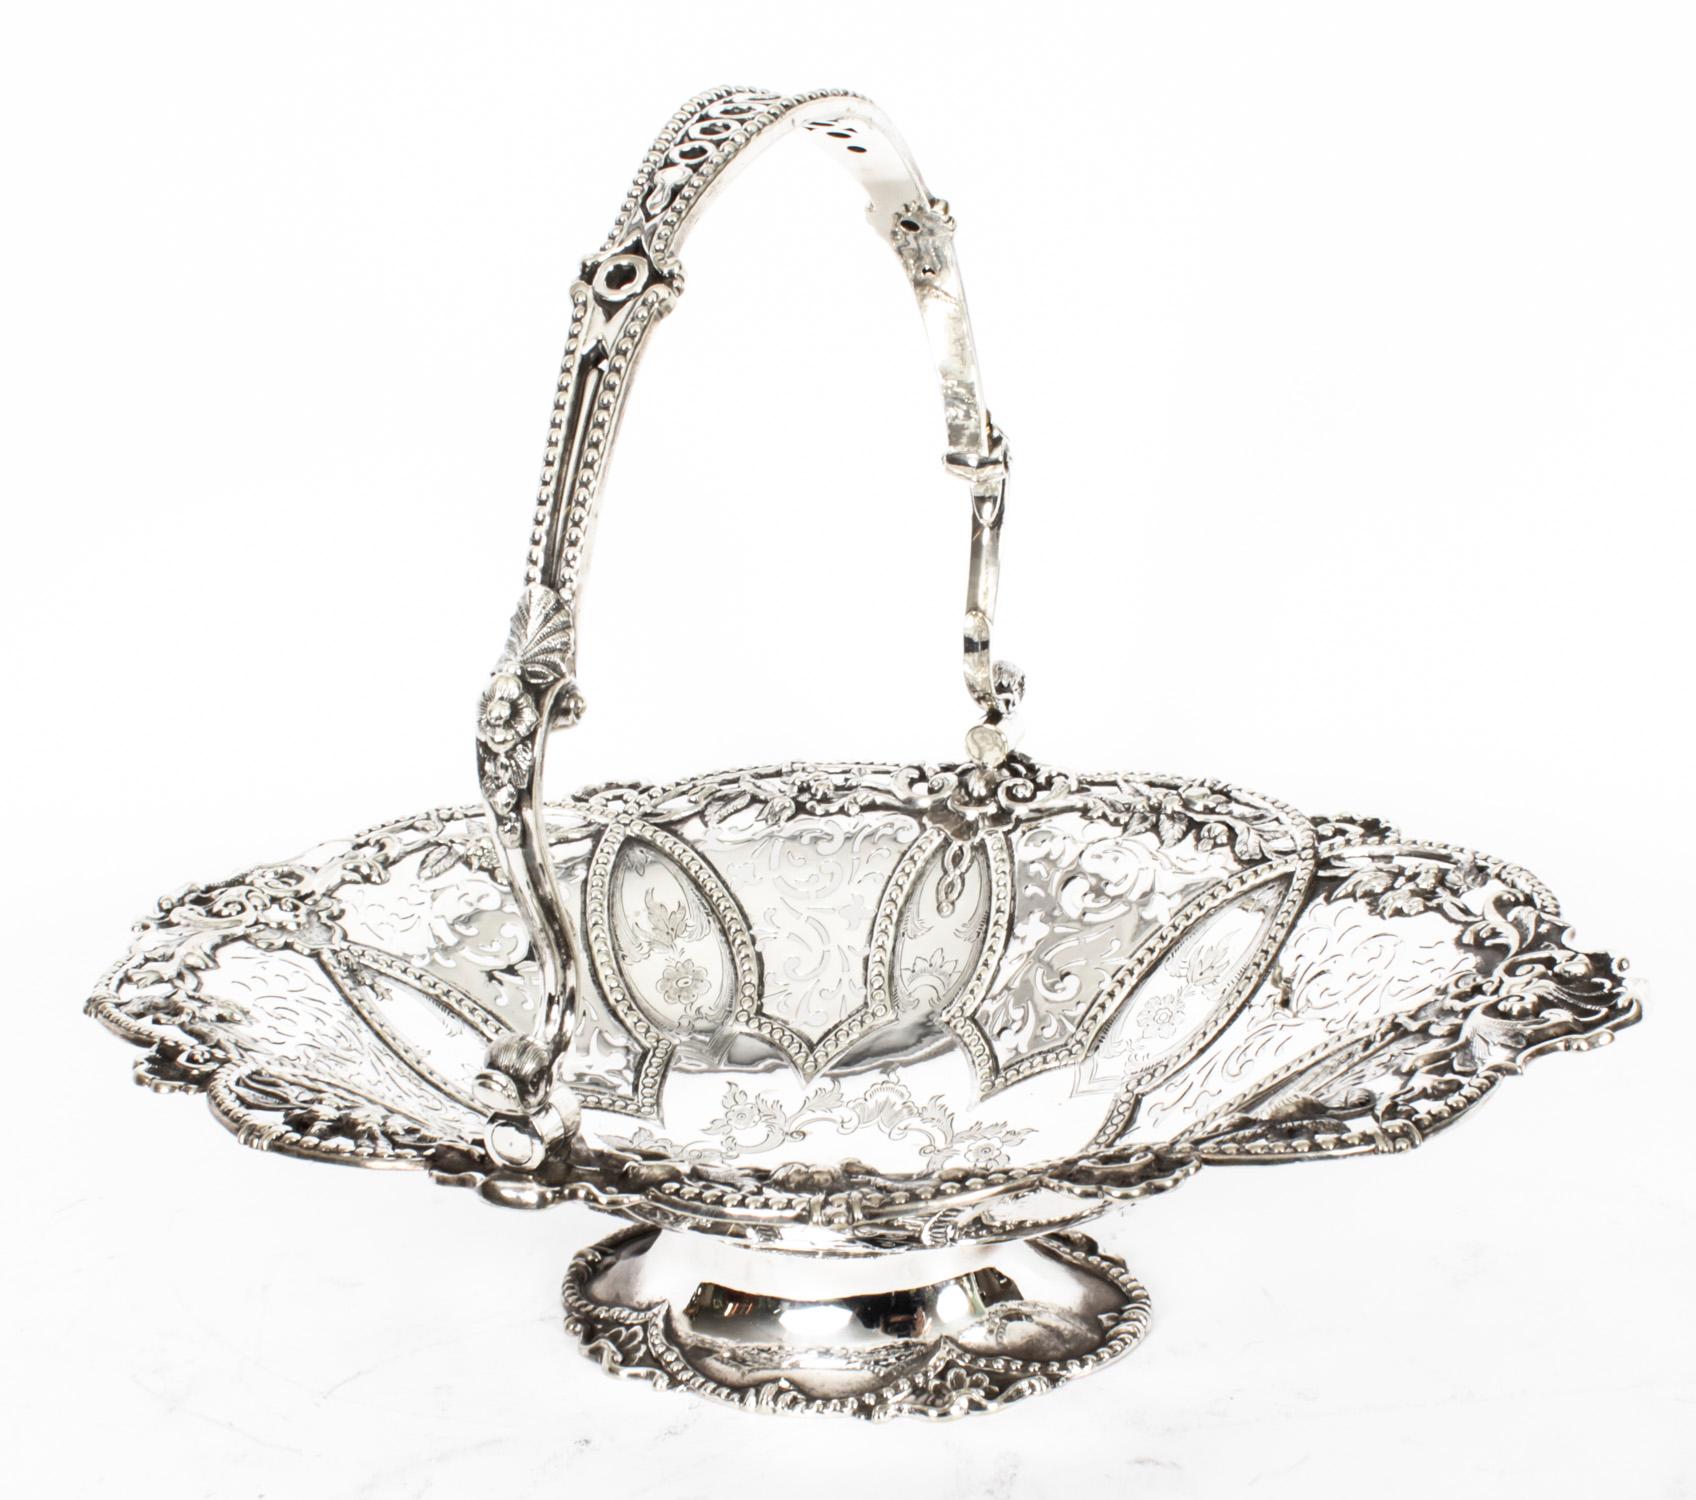 This is a stunning antique English Victorian silver plated fruit or bread basket with fabulous embossed and engraved decoration, circa 1860 in date.

Add an elegant touch to your next dining experience.
 
Condition:
In excellent condition, please